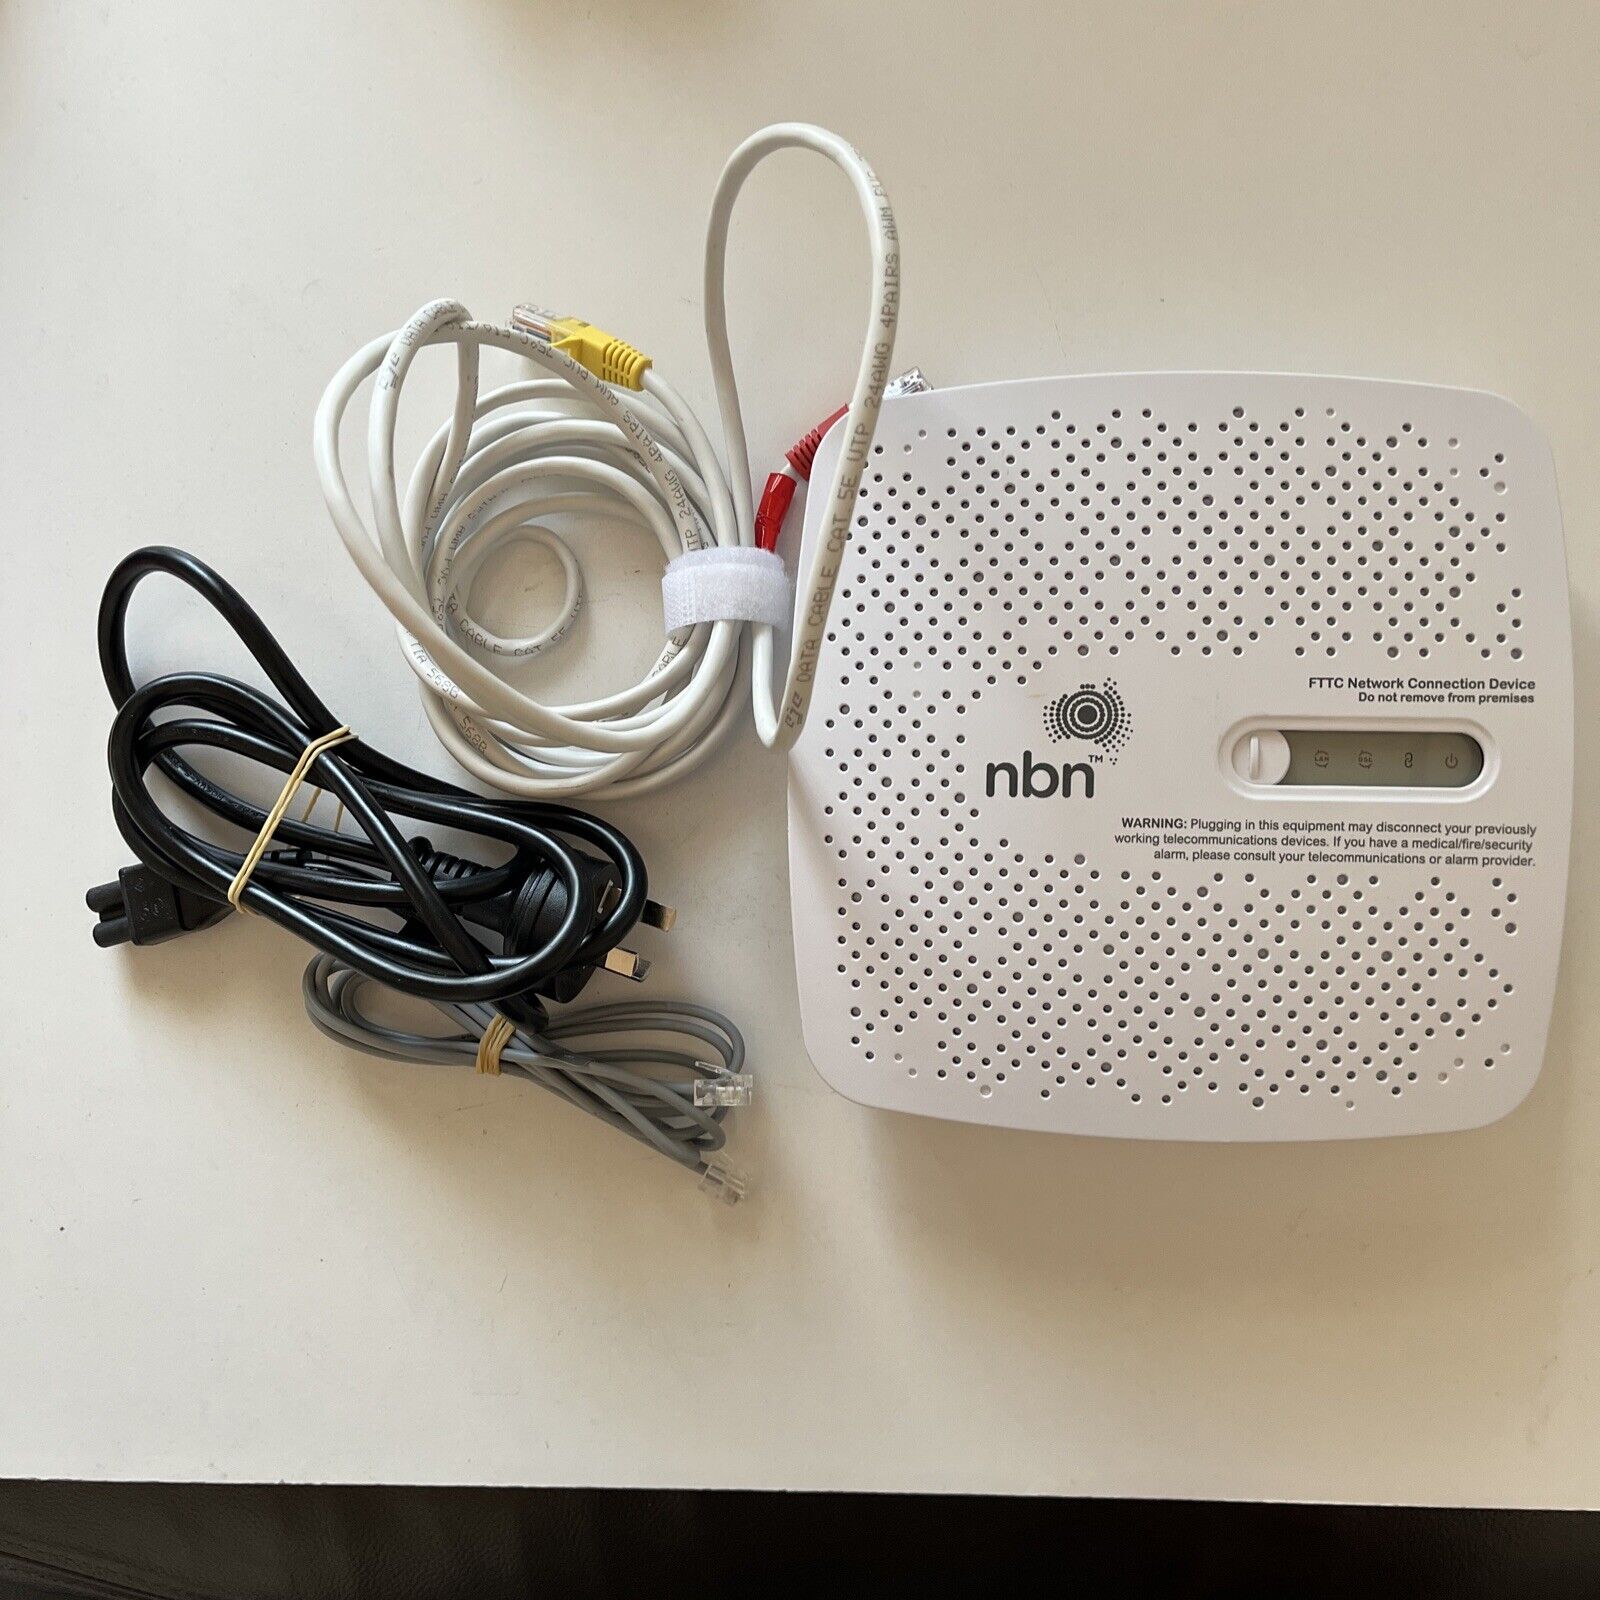 NBN Netcomm Wireless FTTC Network Connection Device NDD-0300